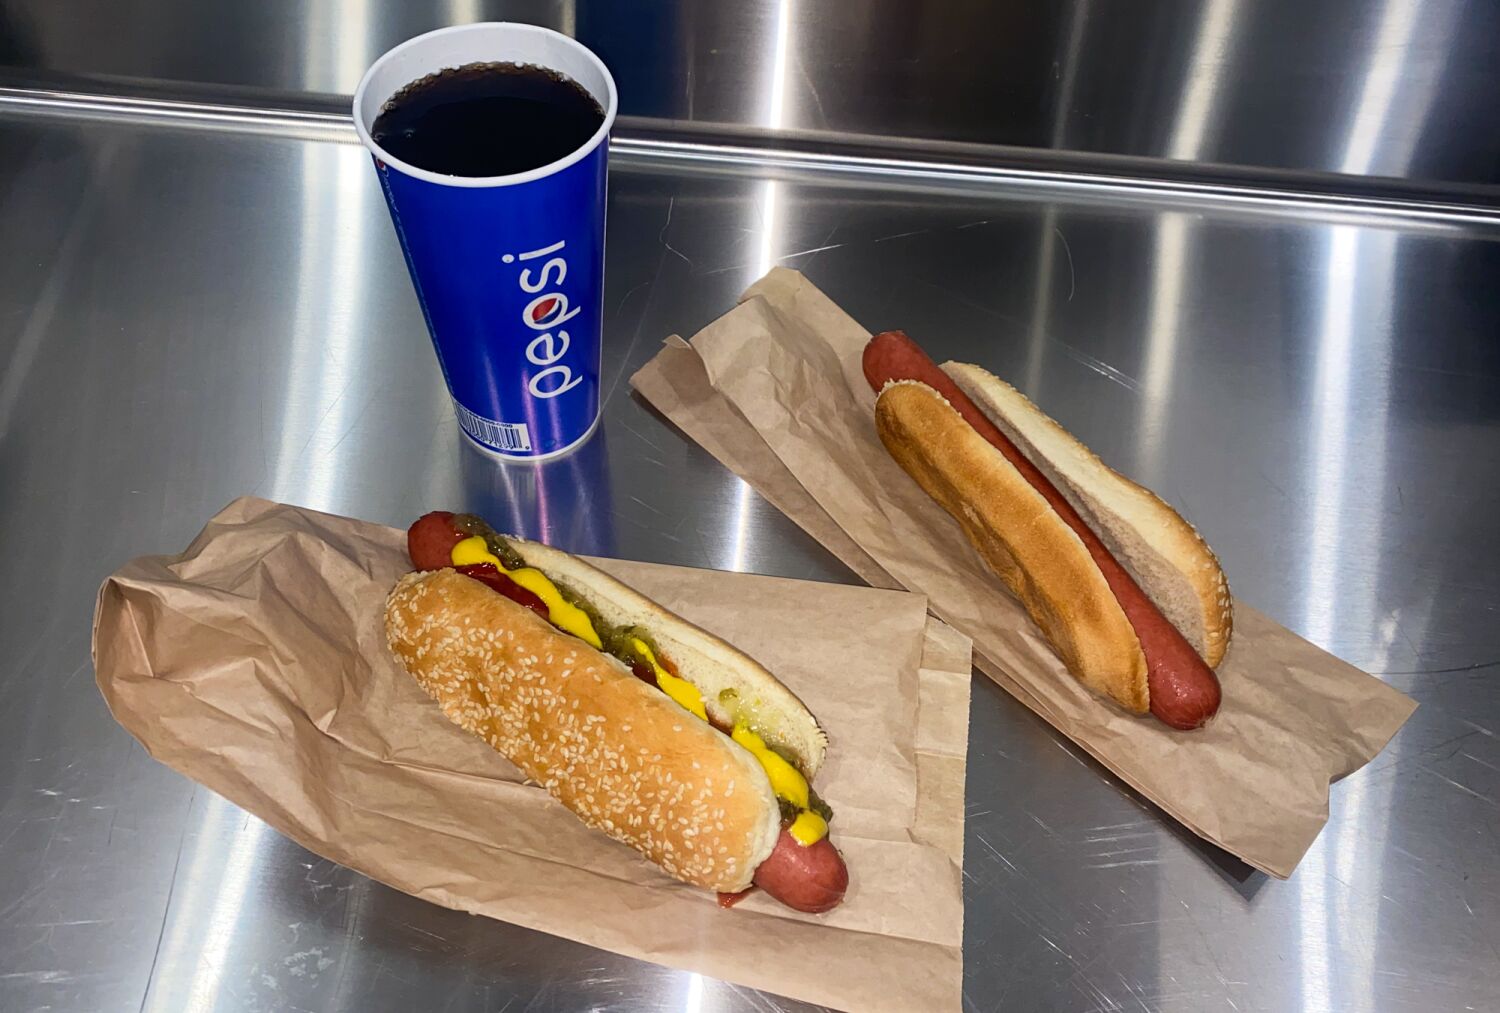 The Costco hot dog combo has been undercut by Sam's Club by 12 cents. Which is better?